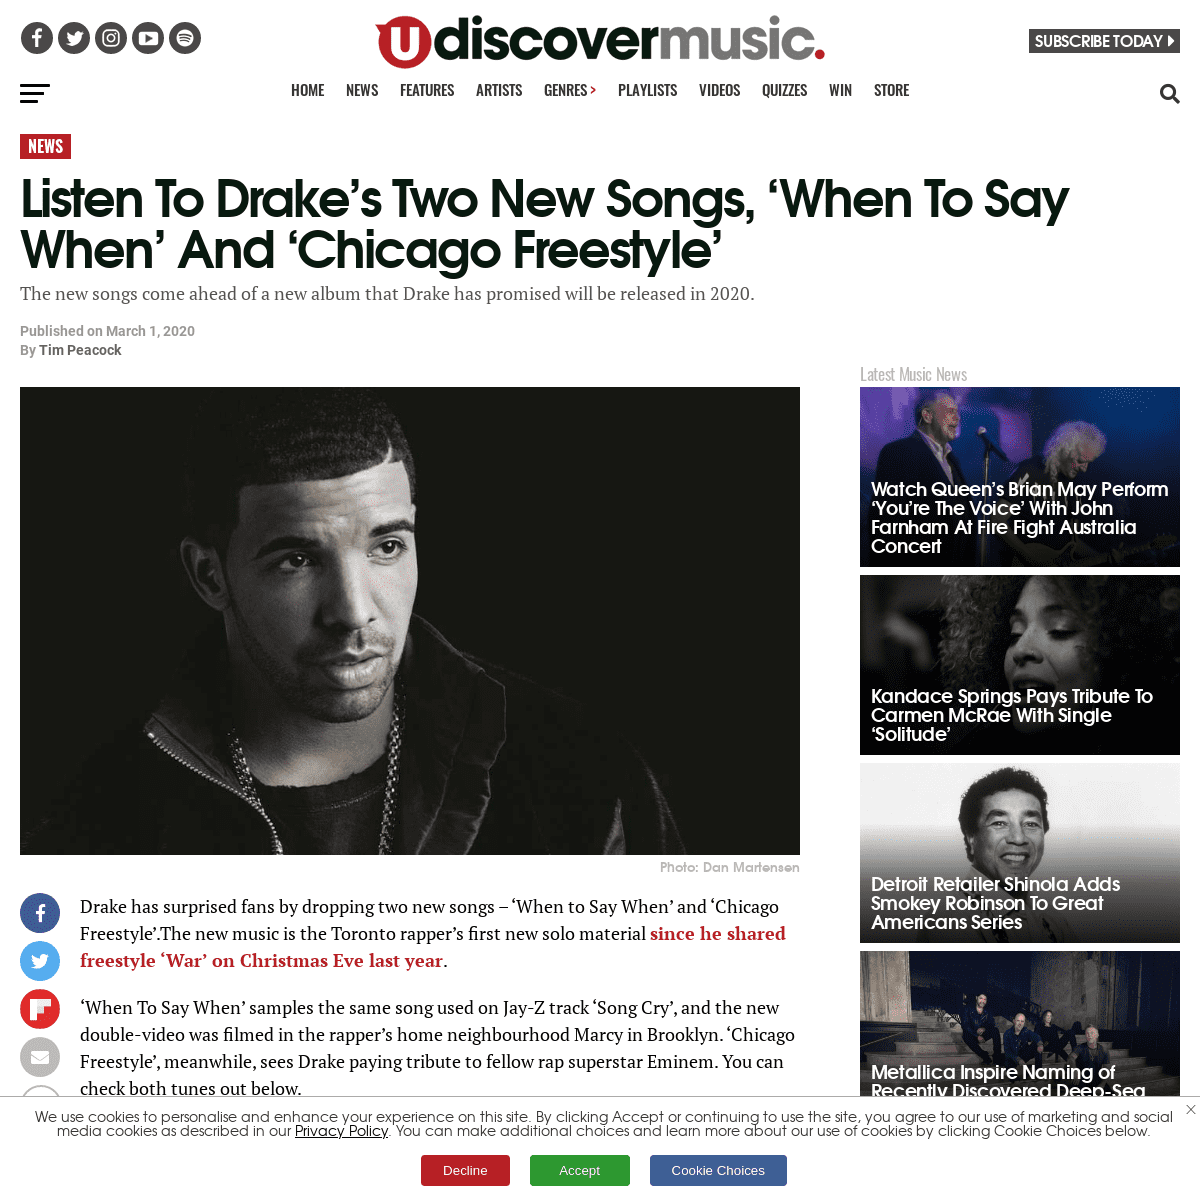 A complete backup of www.udiscovermusic.com/news/drakes-new-songs-chicago-freestyle/